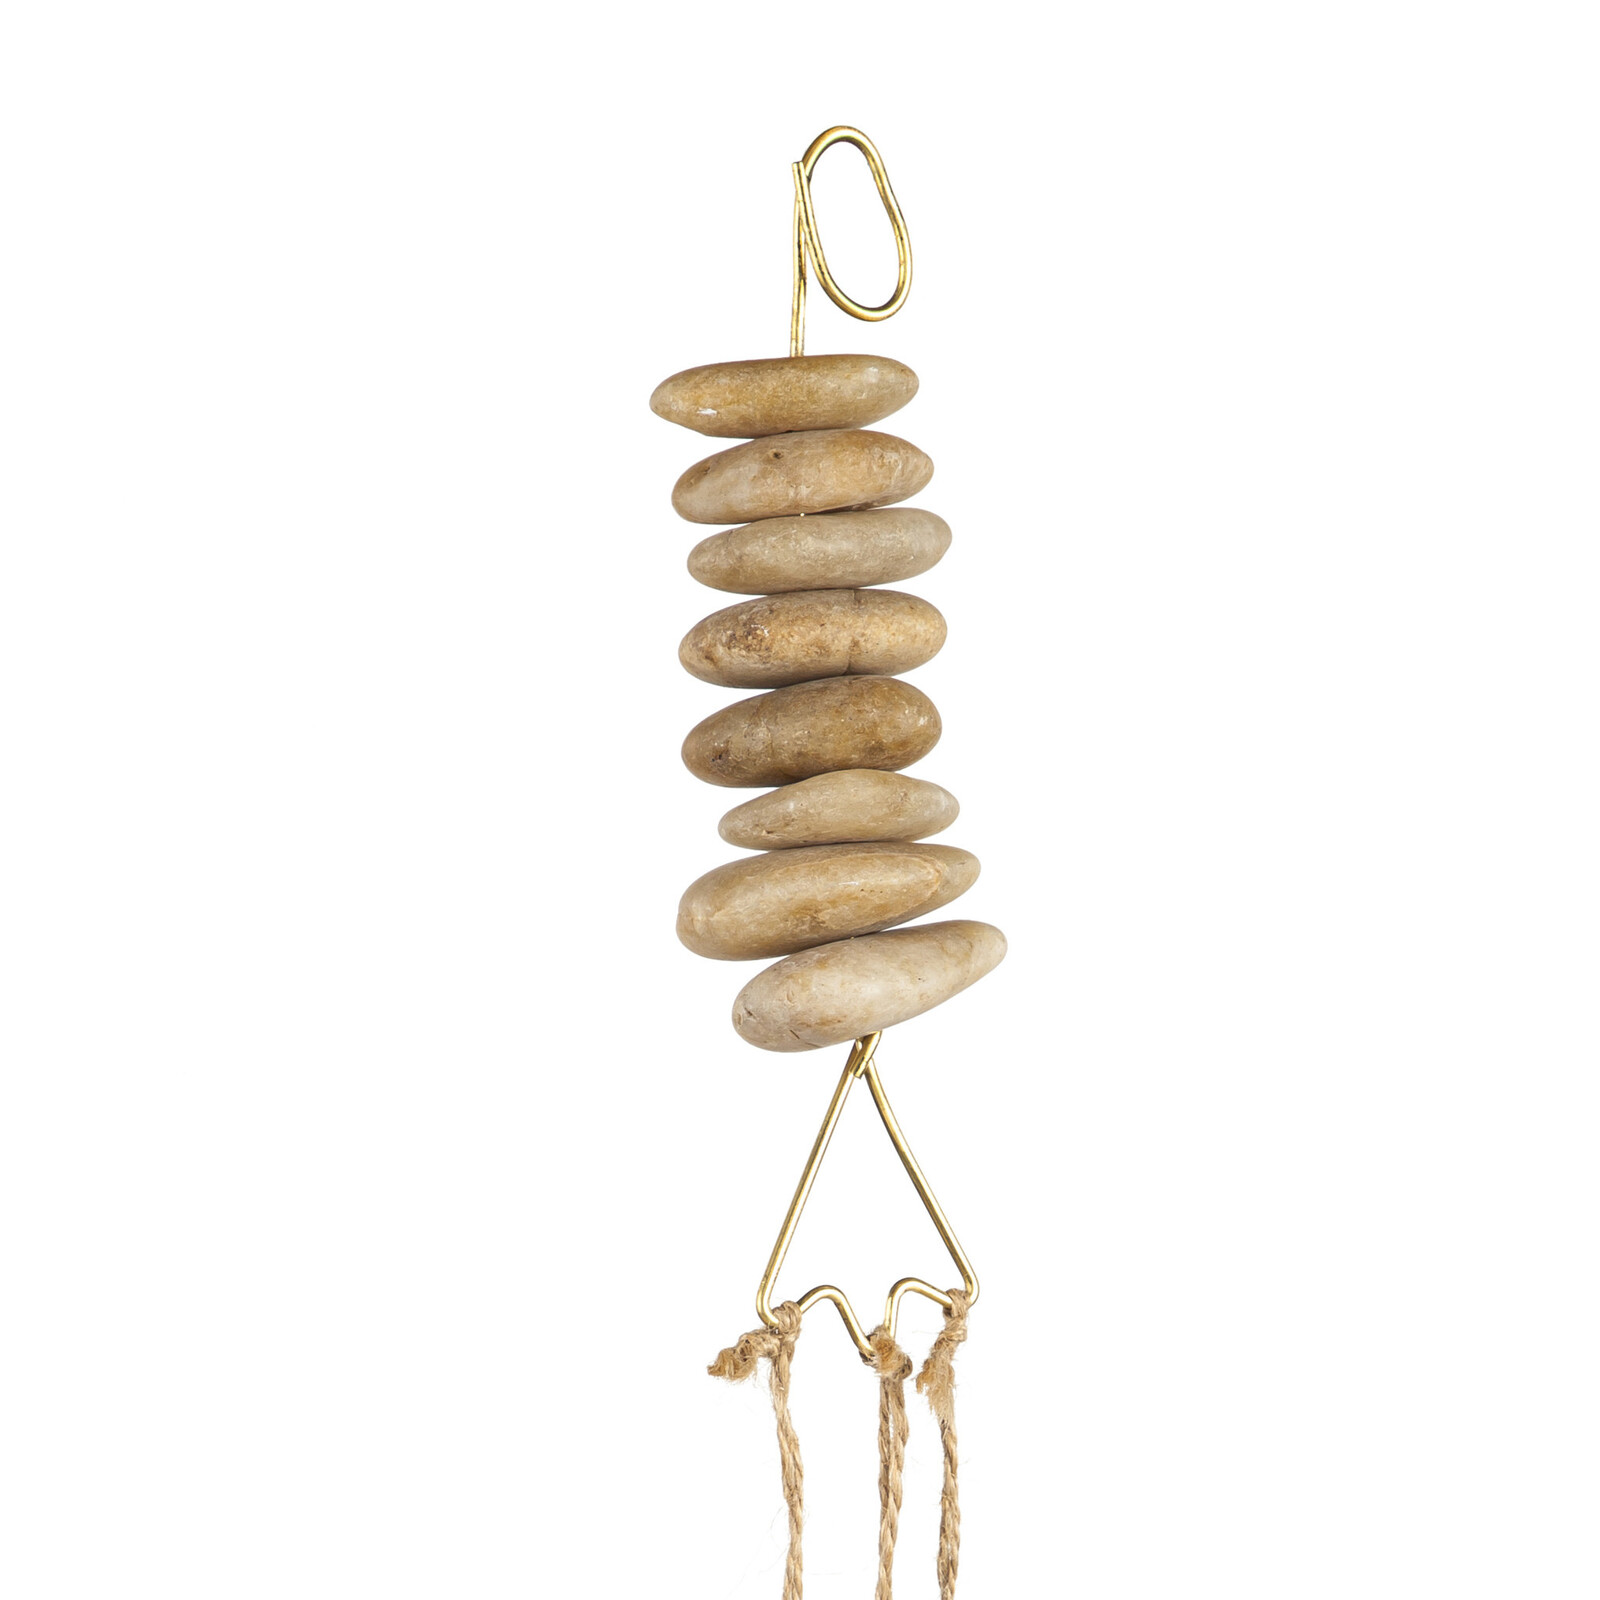 Plow & Hearth Stone Wind Chime   PHC093 loading=